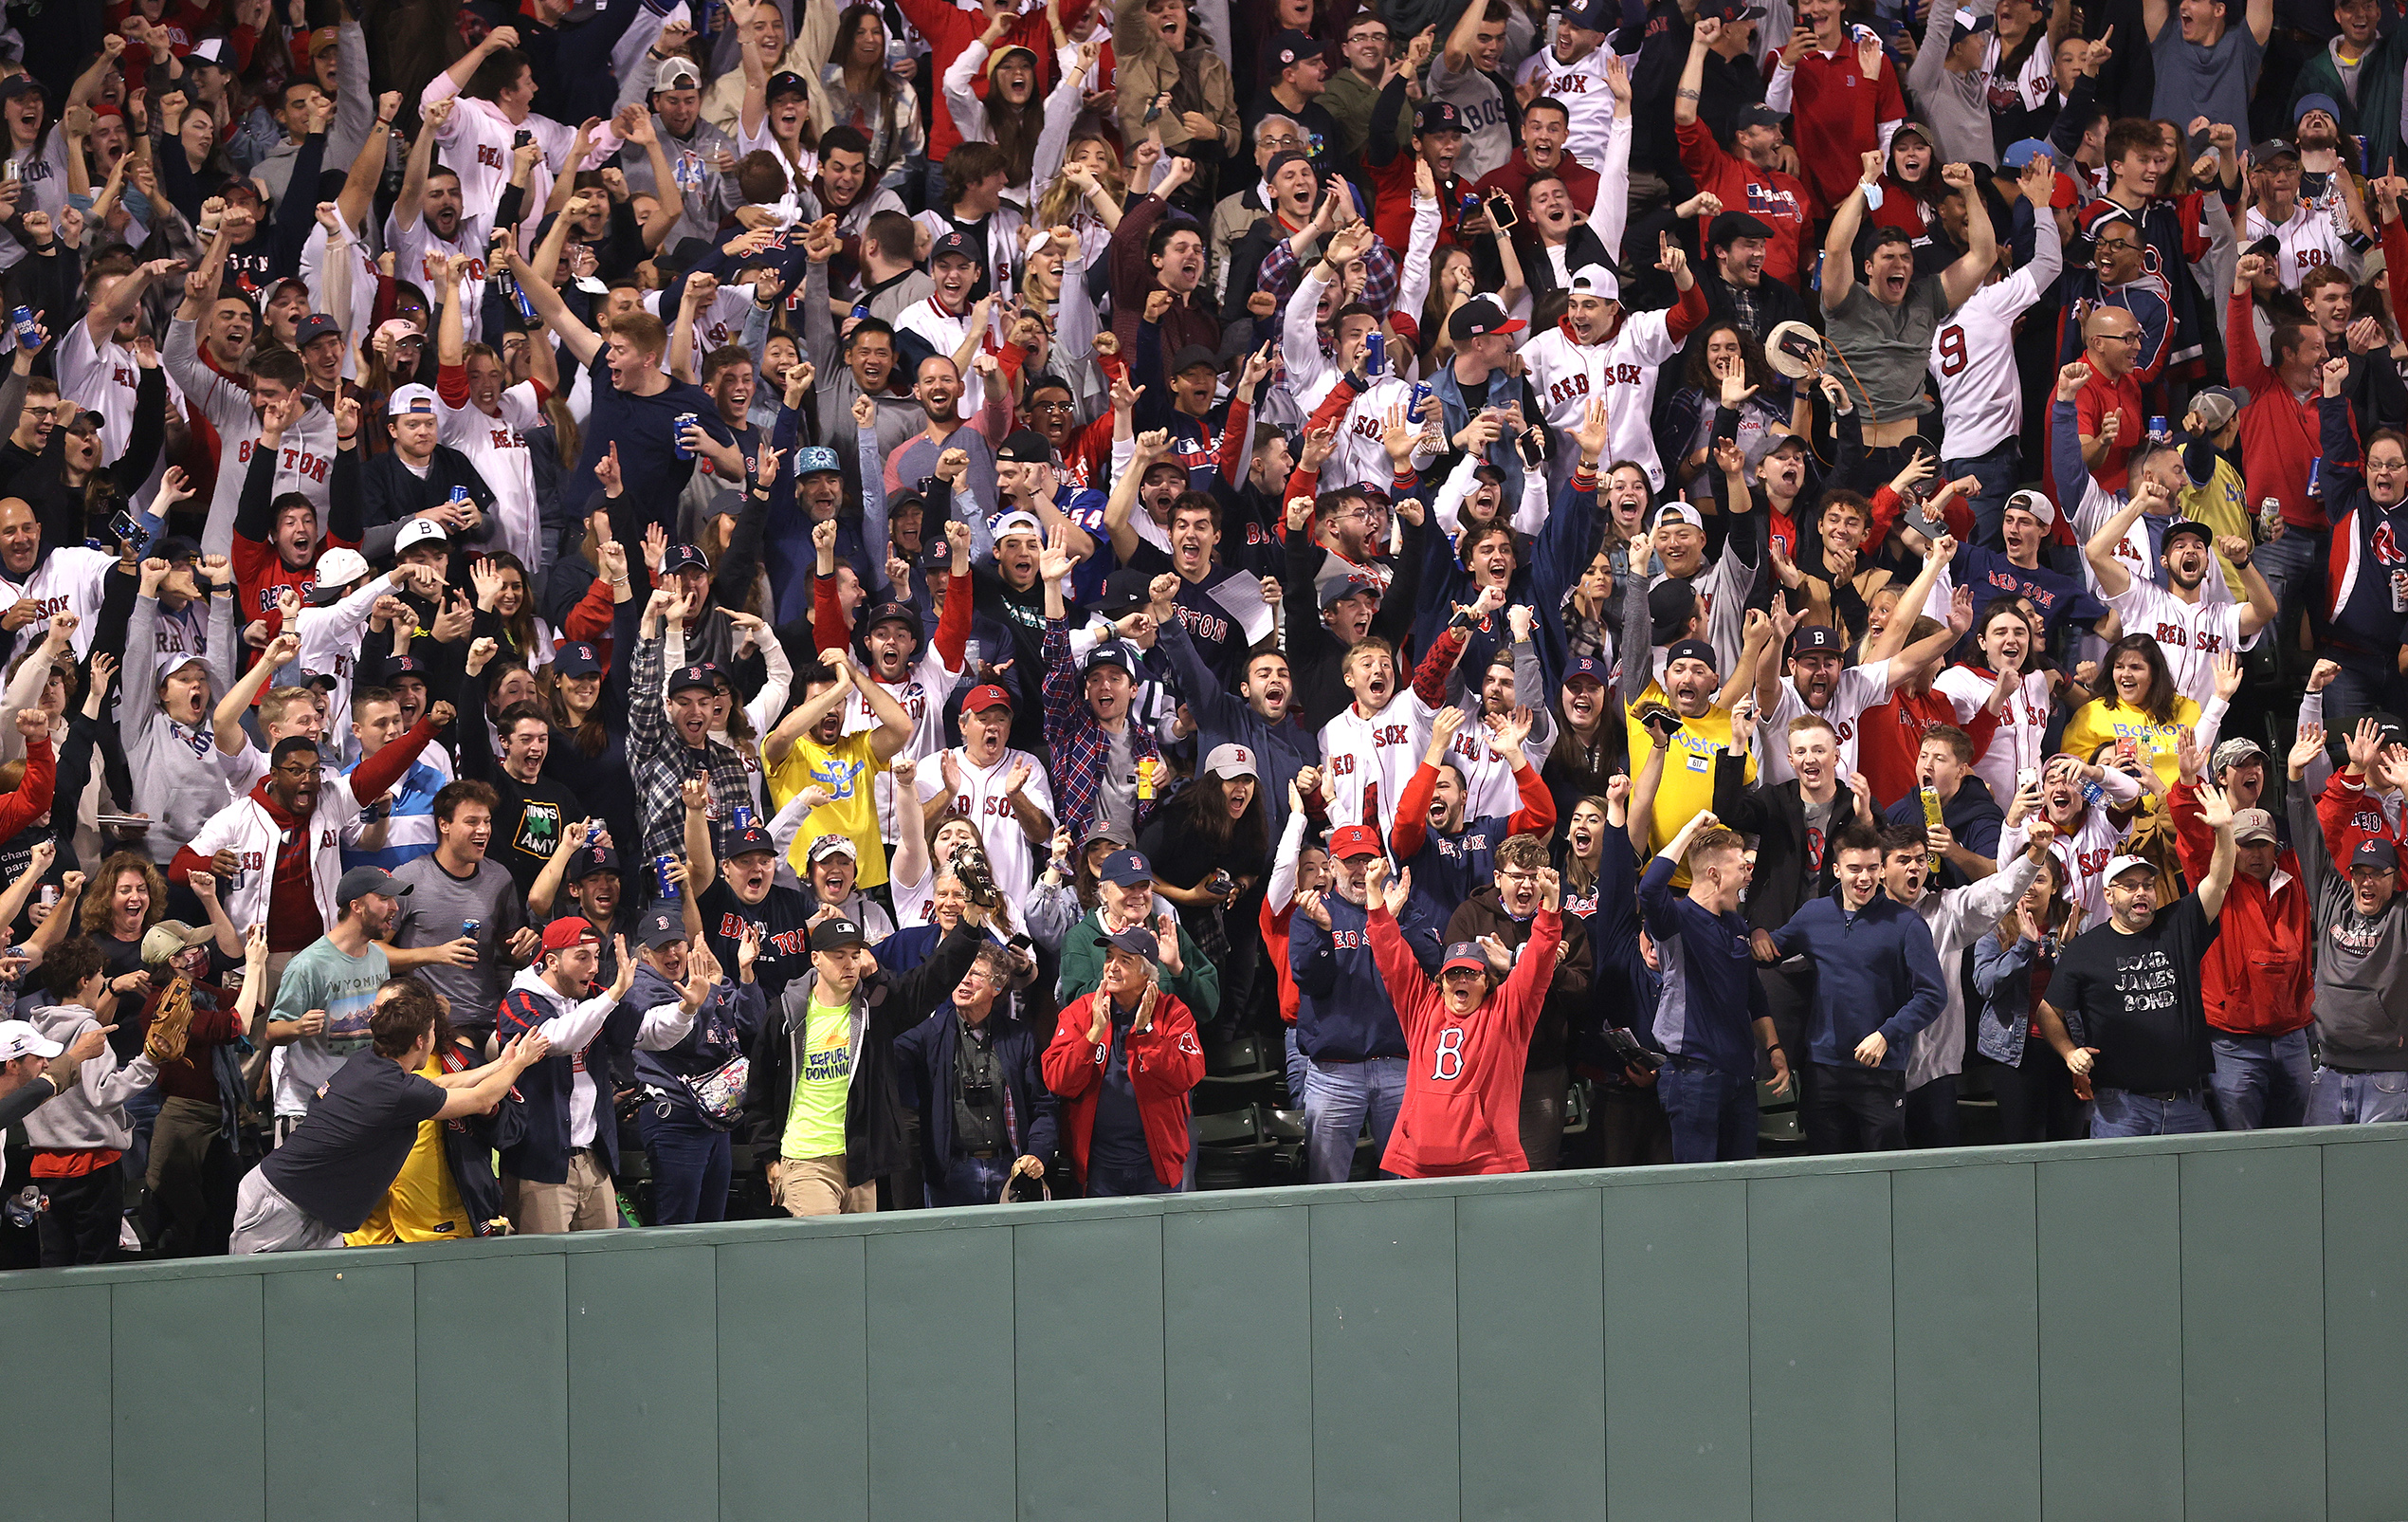 Photos: Red Sox Fans Brave Cold For Opening Day At Fenway Park